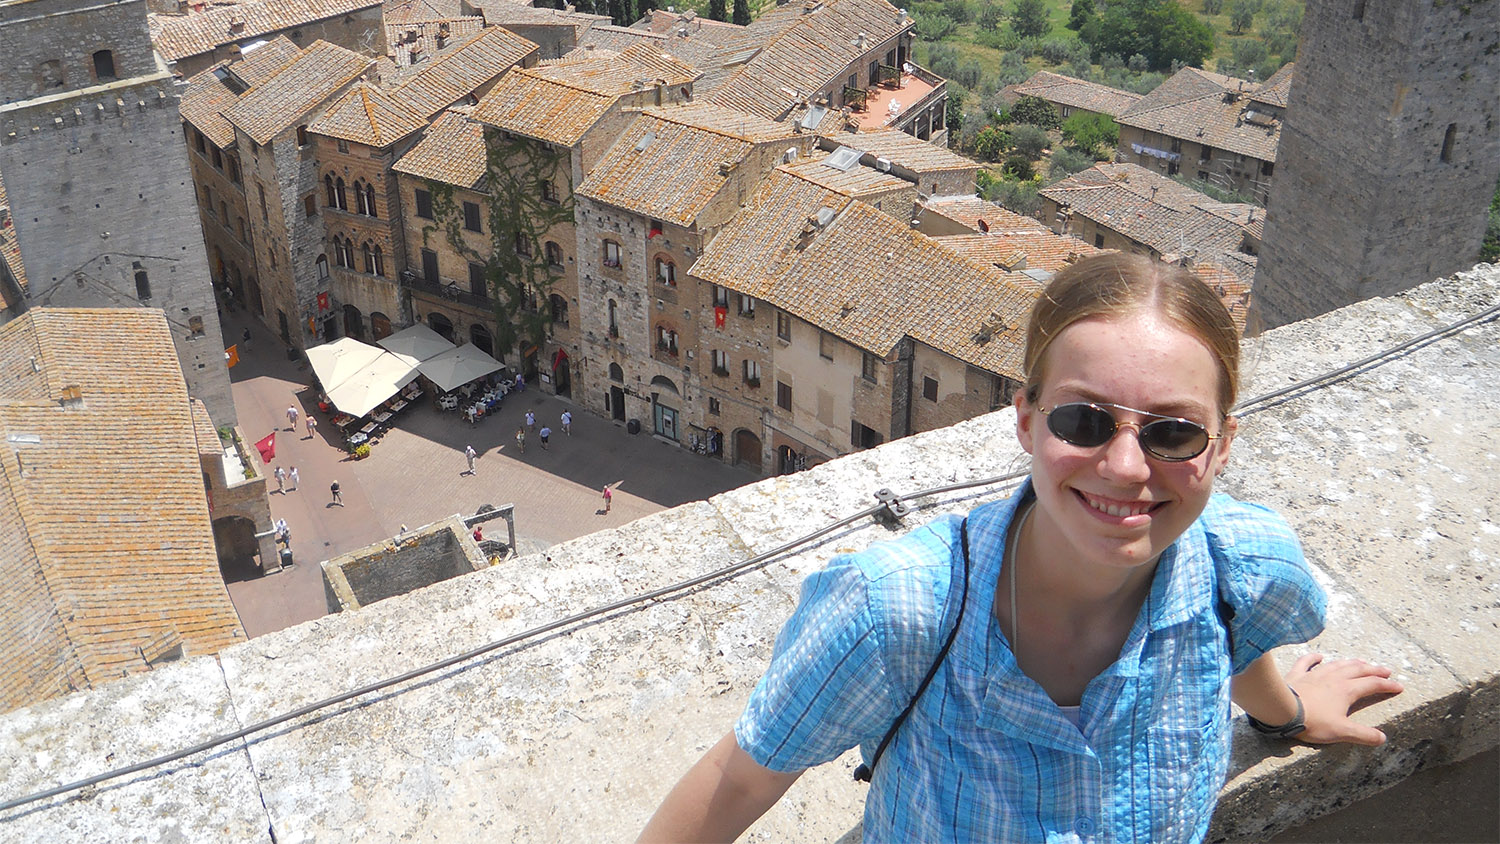 Katie Wassell on an overlook of the village of San Gimignano in Italy